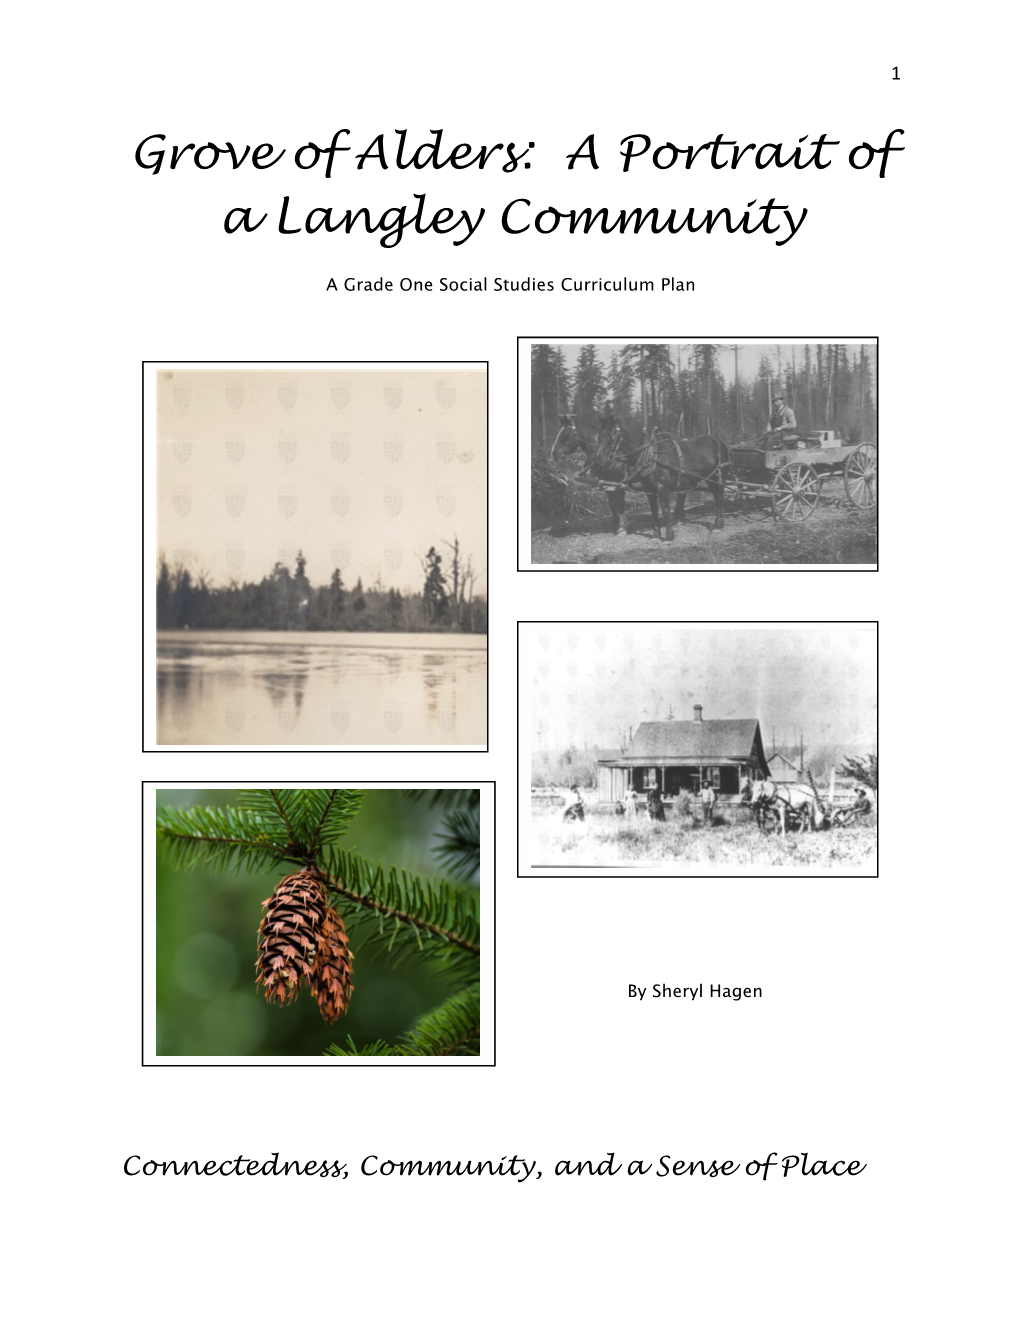 Grove of Alders: a Portrait of a Langley Community